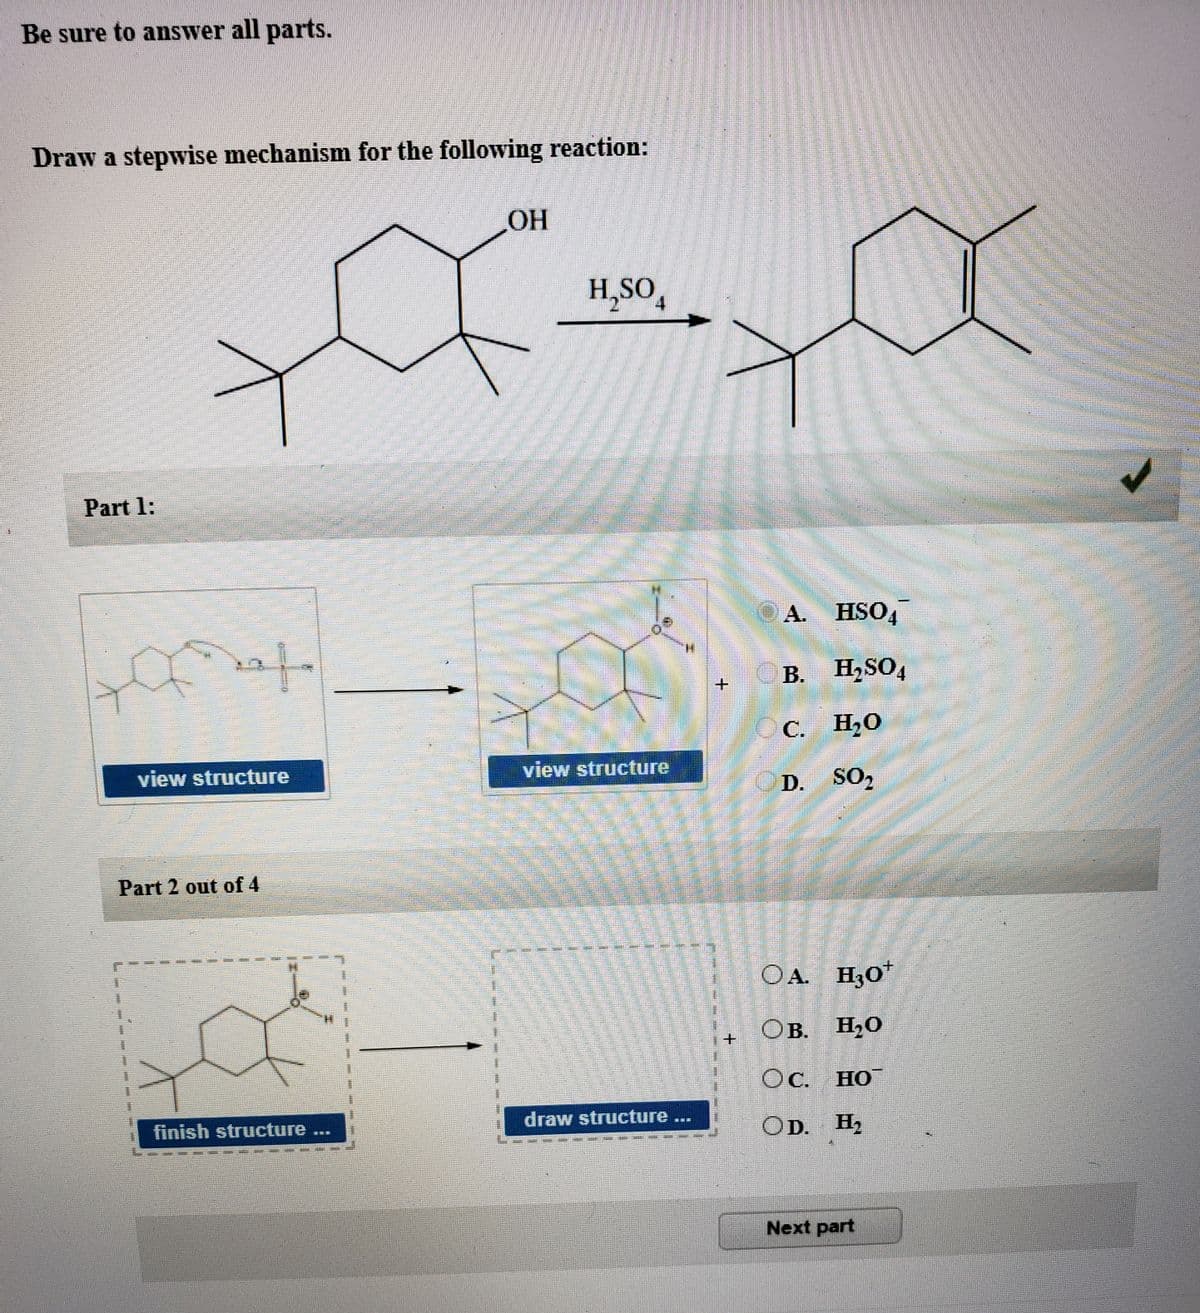 Be sure to answer all parts.
Draw a stepwise mechanism for the following reaction:
OH
H,SO,
Part 1:
A. HSO,
for
B.
H,SO,
C. H20
view structure
view structure
SO2
Part 2 out of 4
OA. H;O"
OB.
. H,O
Oc.
Oc. HO
draw structure...
finish structure
OD. H2
報
Next part
+.
